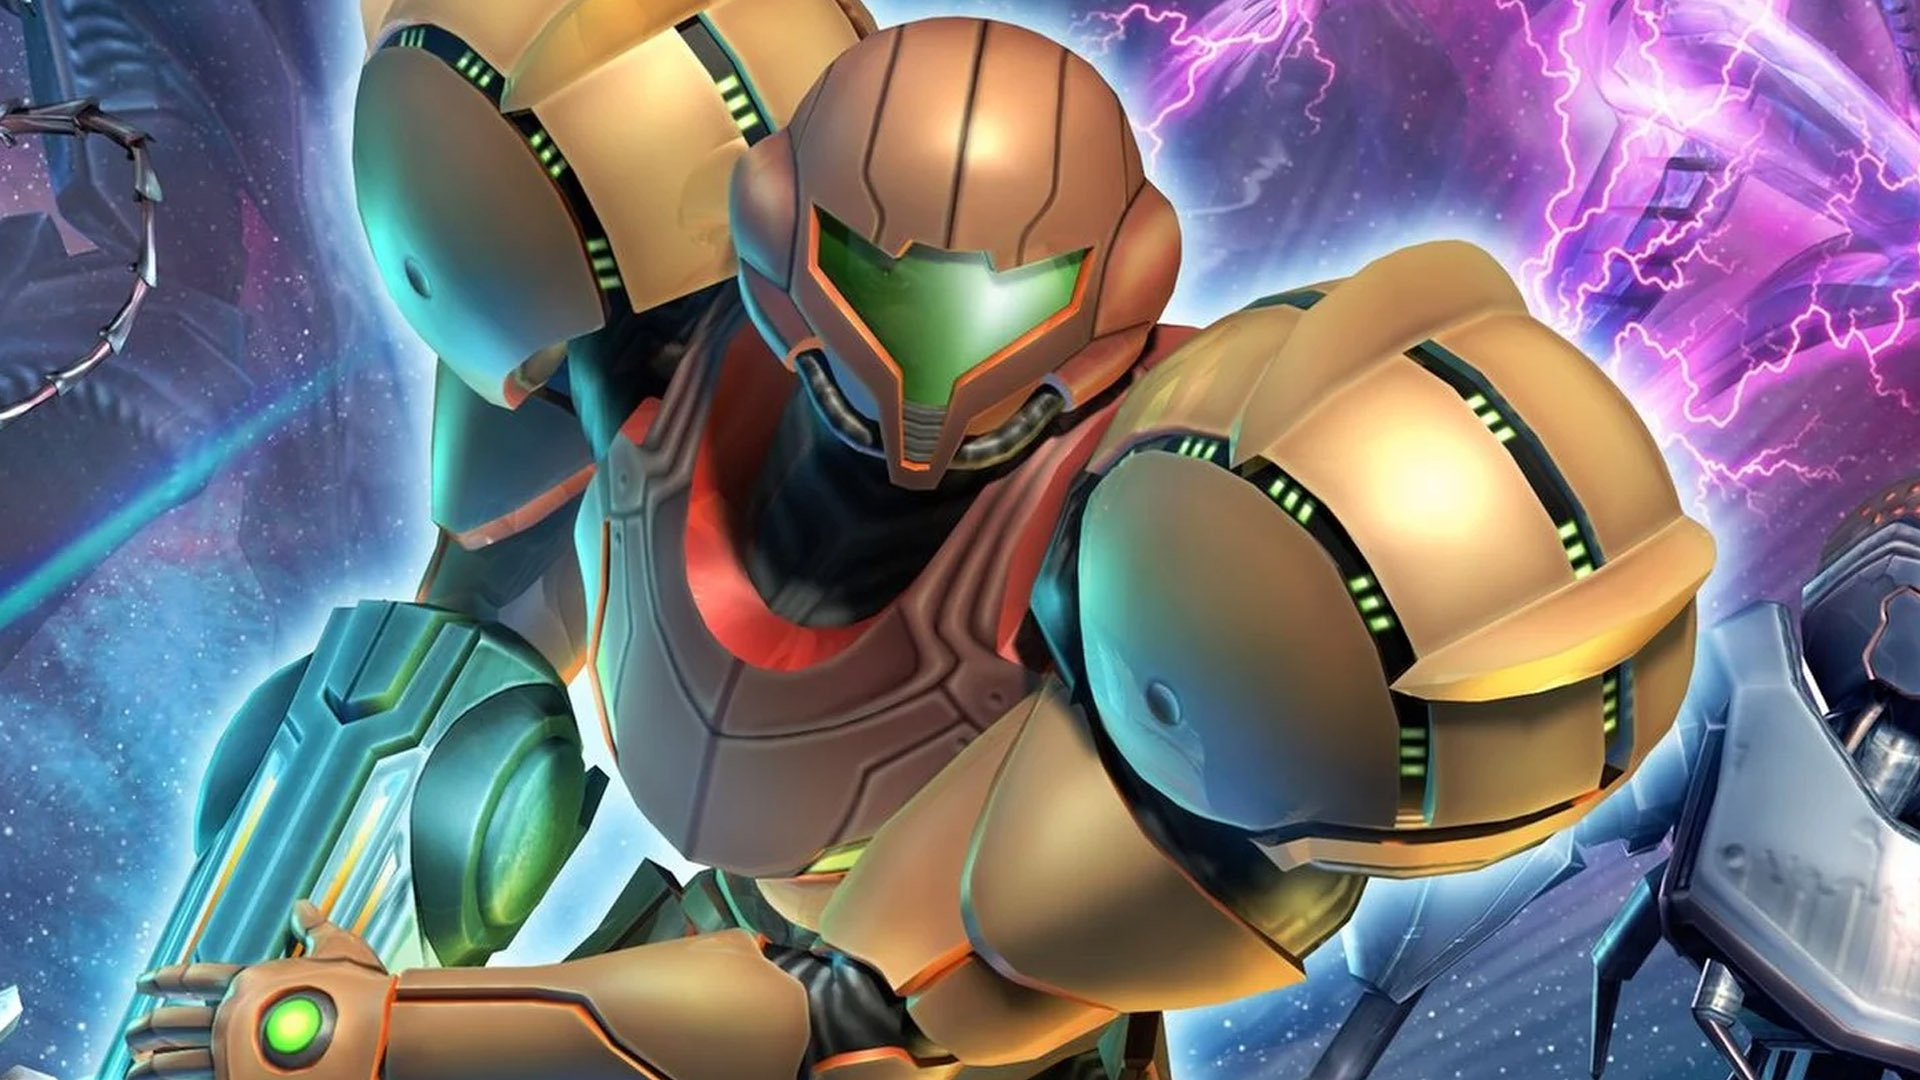 metroid prime trilogy release date